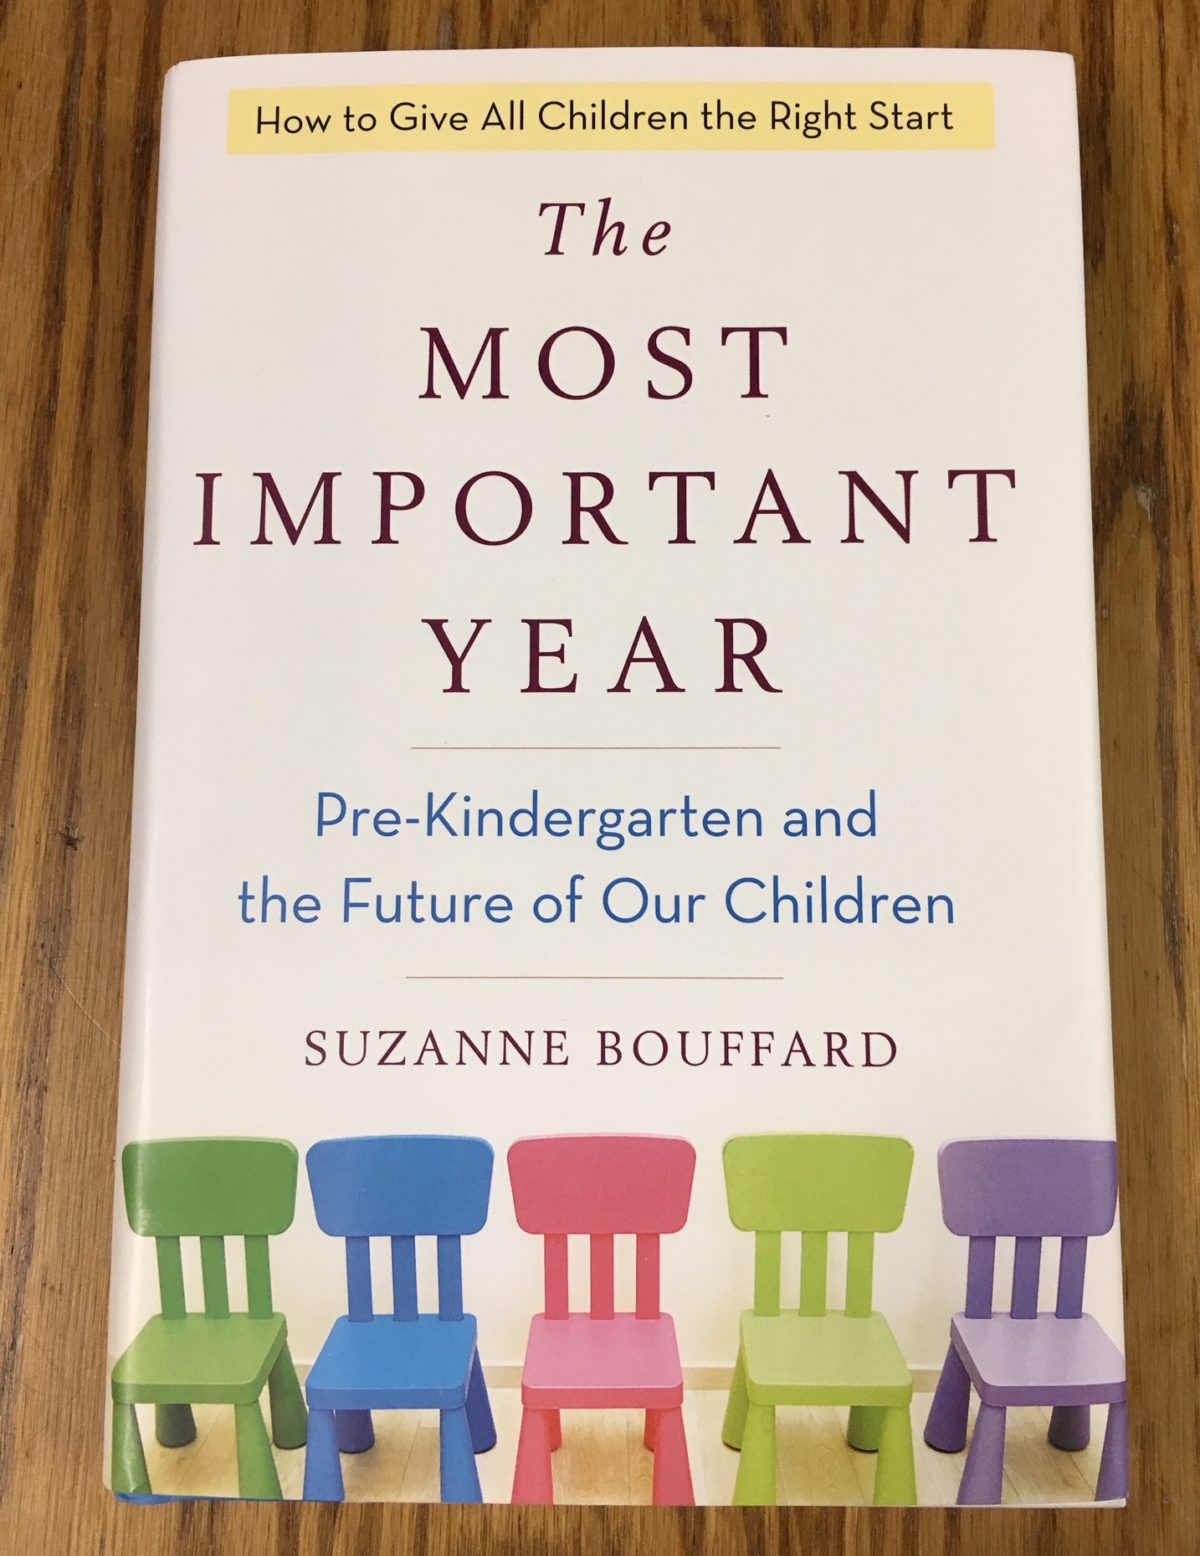 Preschool and the Future of Our Children